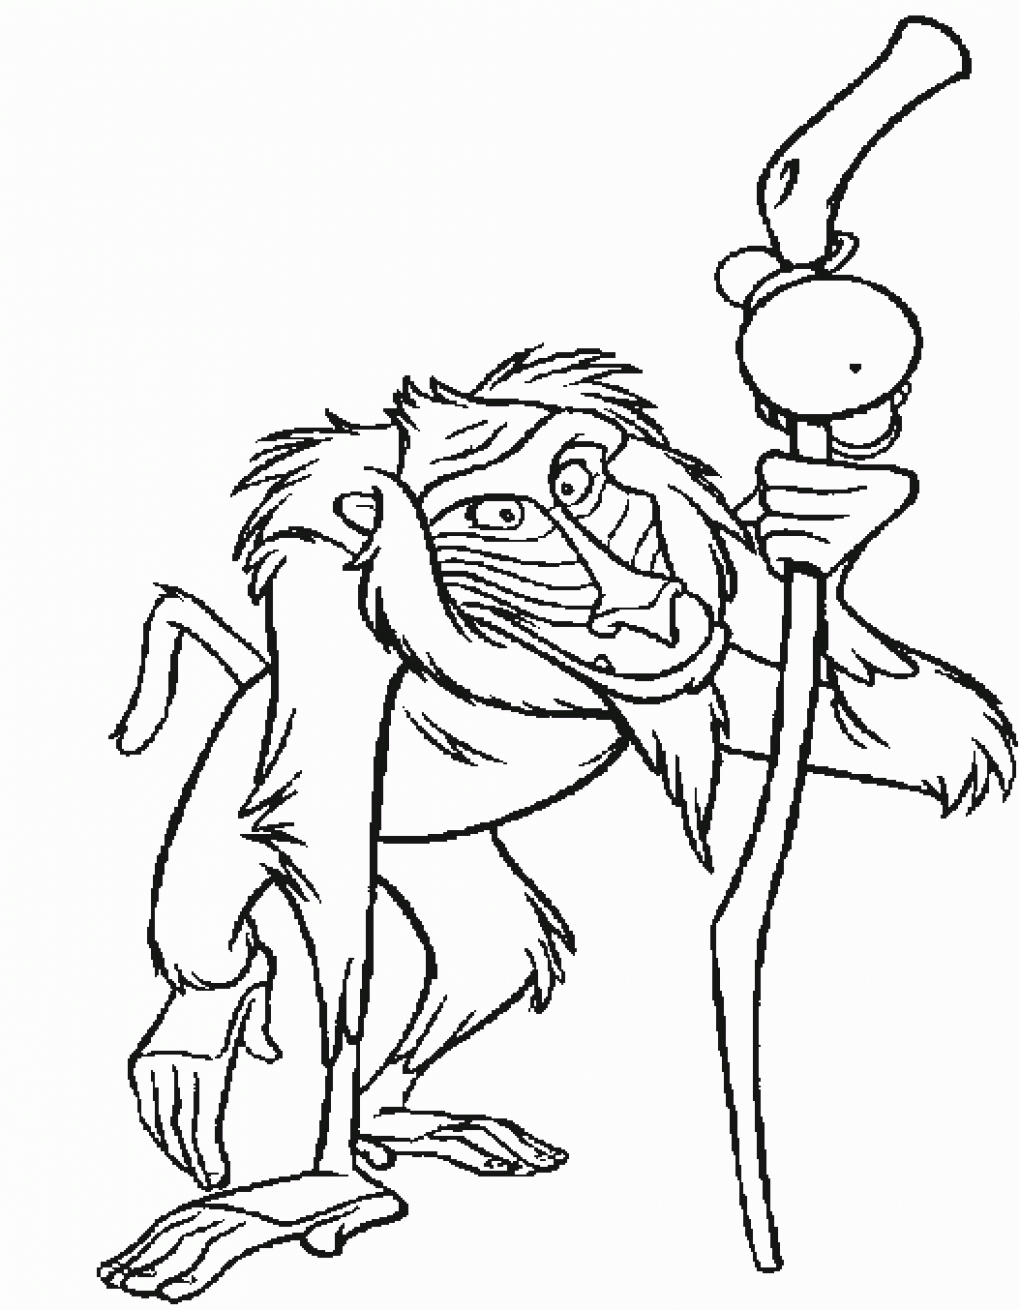 Free Lion King Coloring Pages Simba - VoteForVerde.com